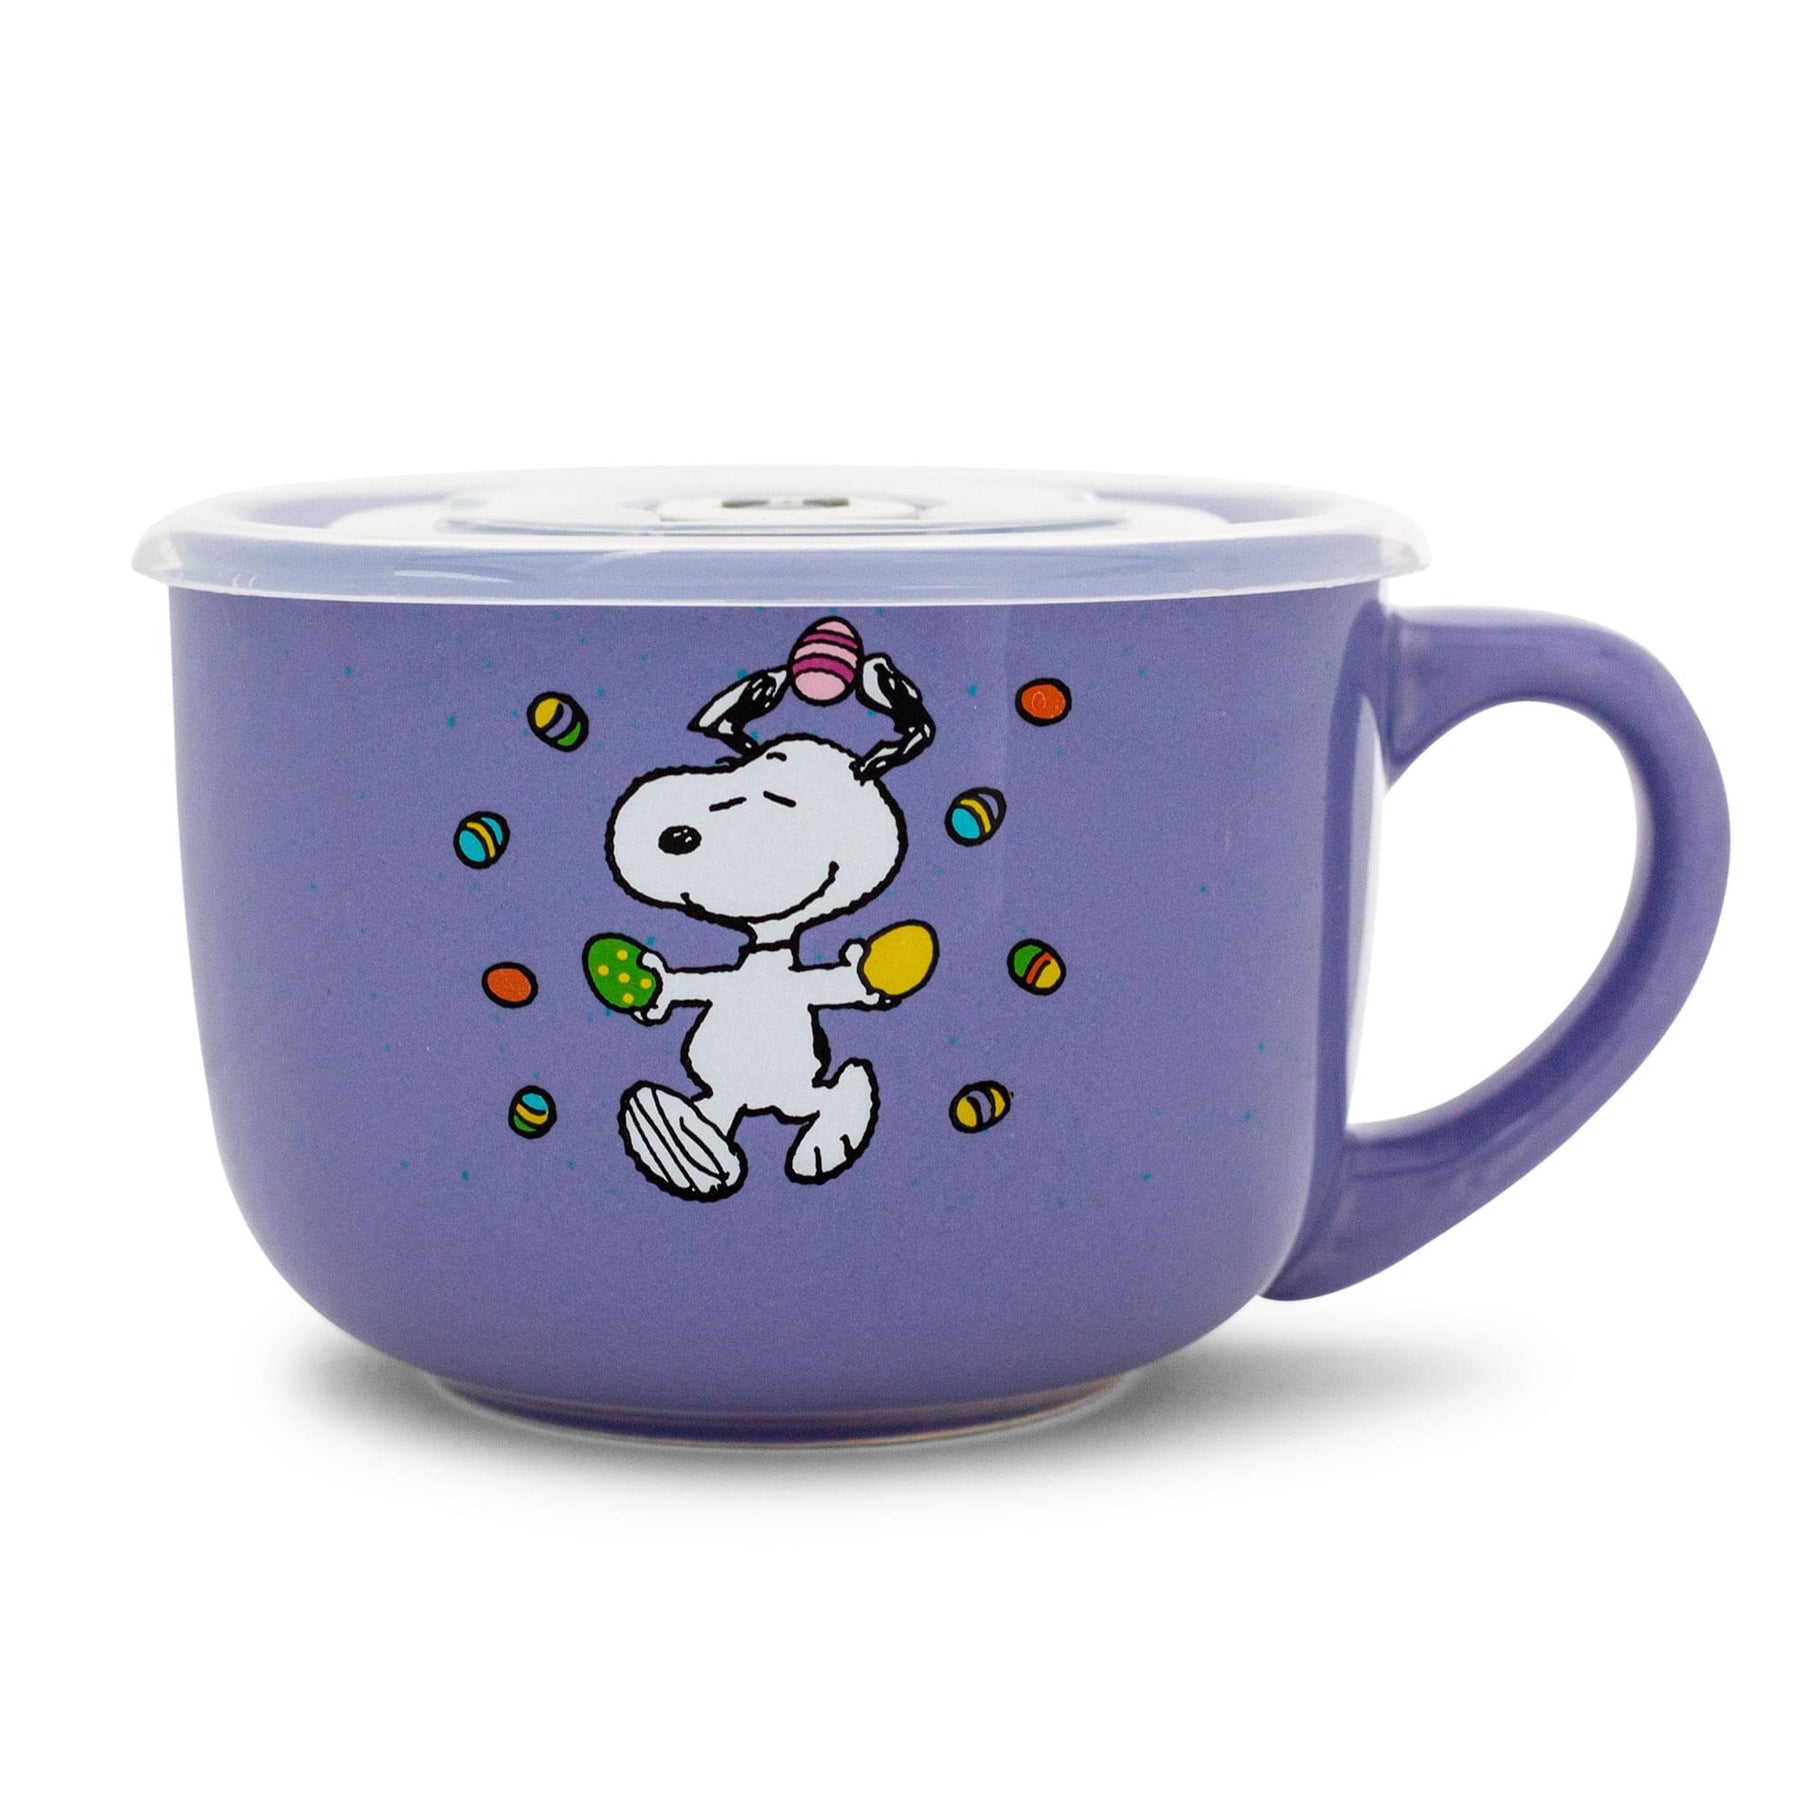 Peanuts Snoopy Easter Pastel Purple Soup Mug With Vented Lid | Holds 24 Ounces